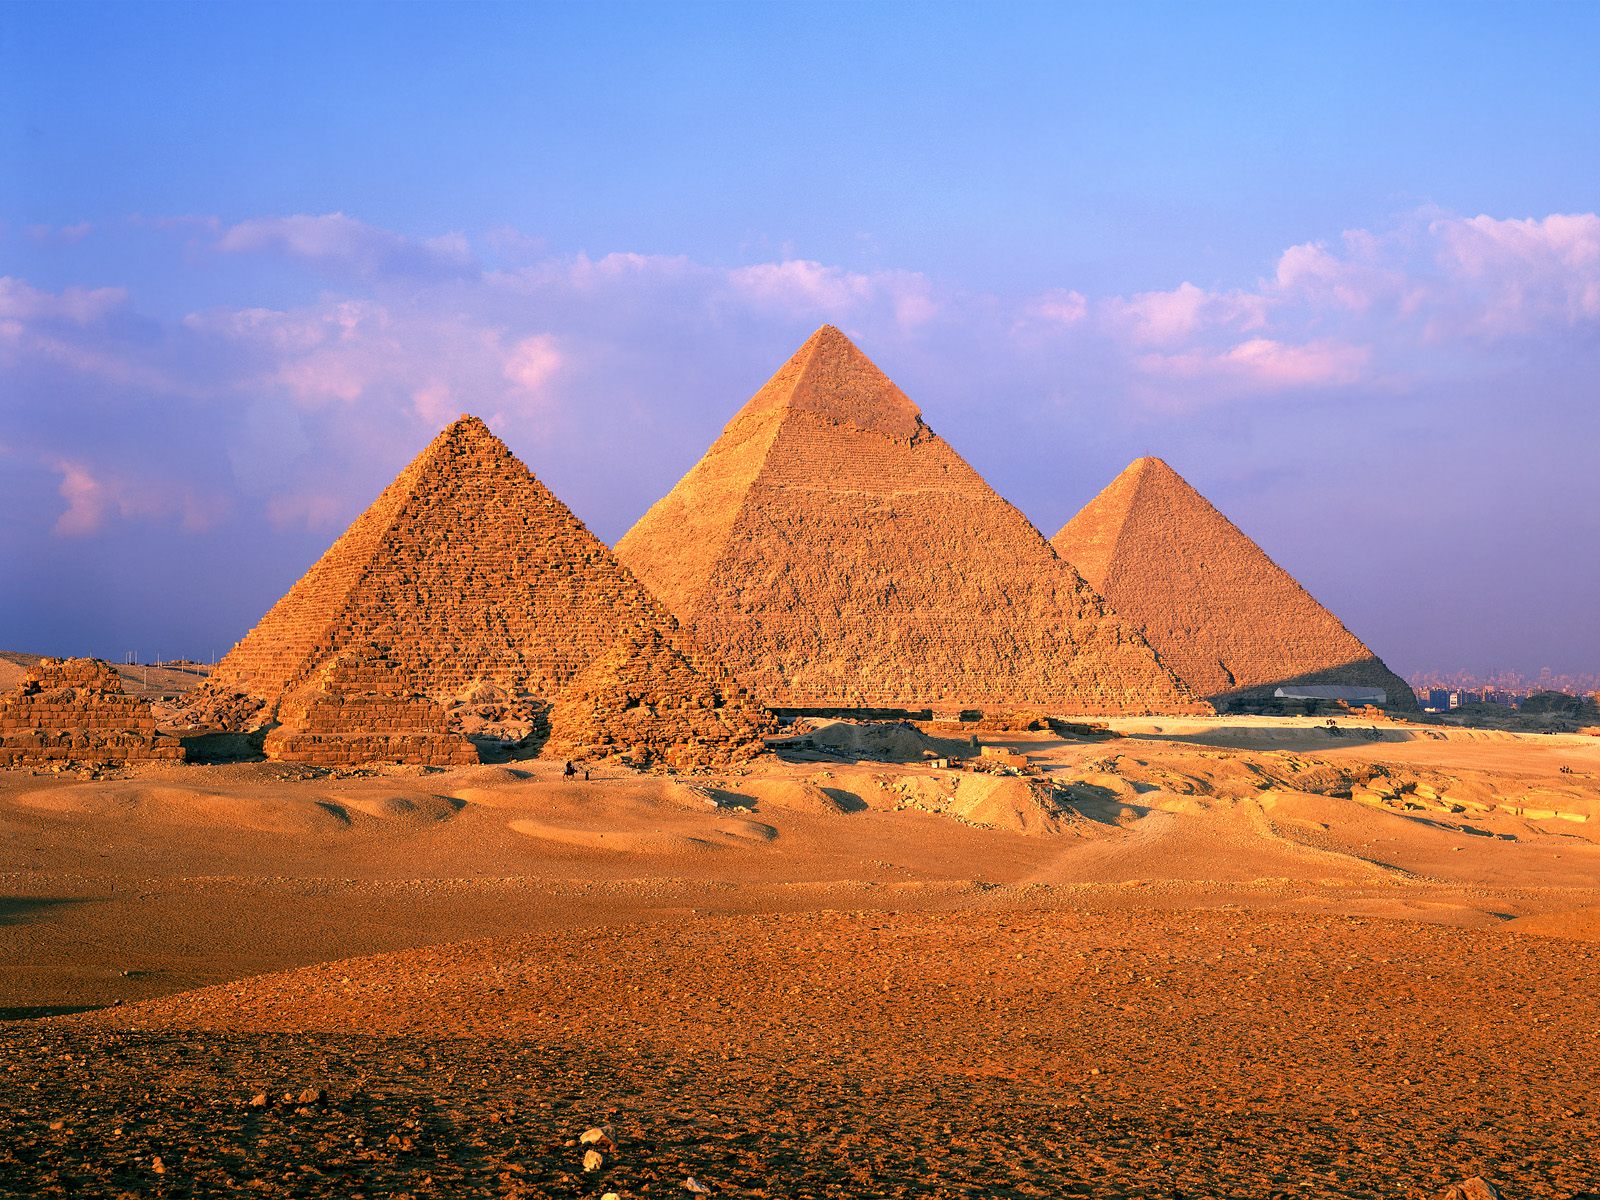 Pyramids of Giza 10 interesting facts about the Great Pyramid of Giza